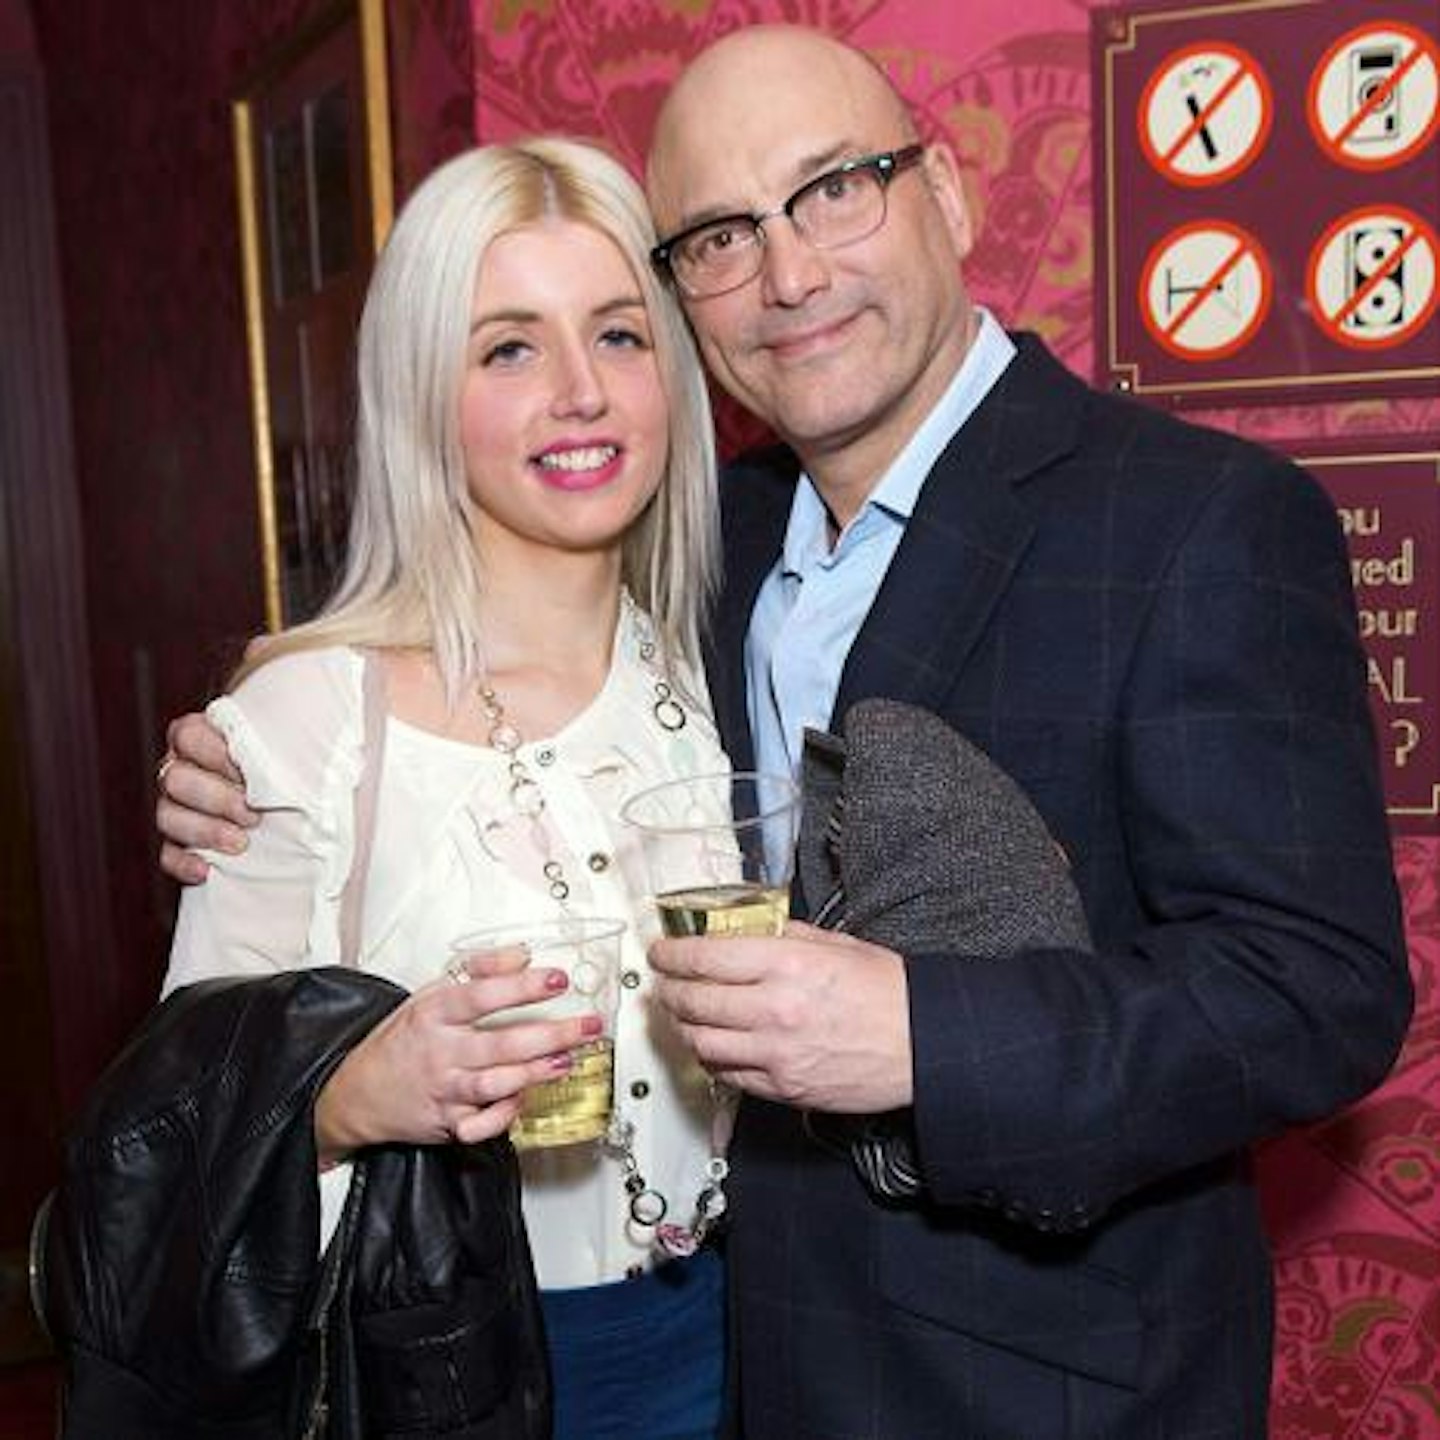 Masterchef star Gregg Wallace with his 27 year-old girlfriend Anne-Marie Sterpini earlier this year